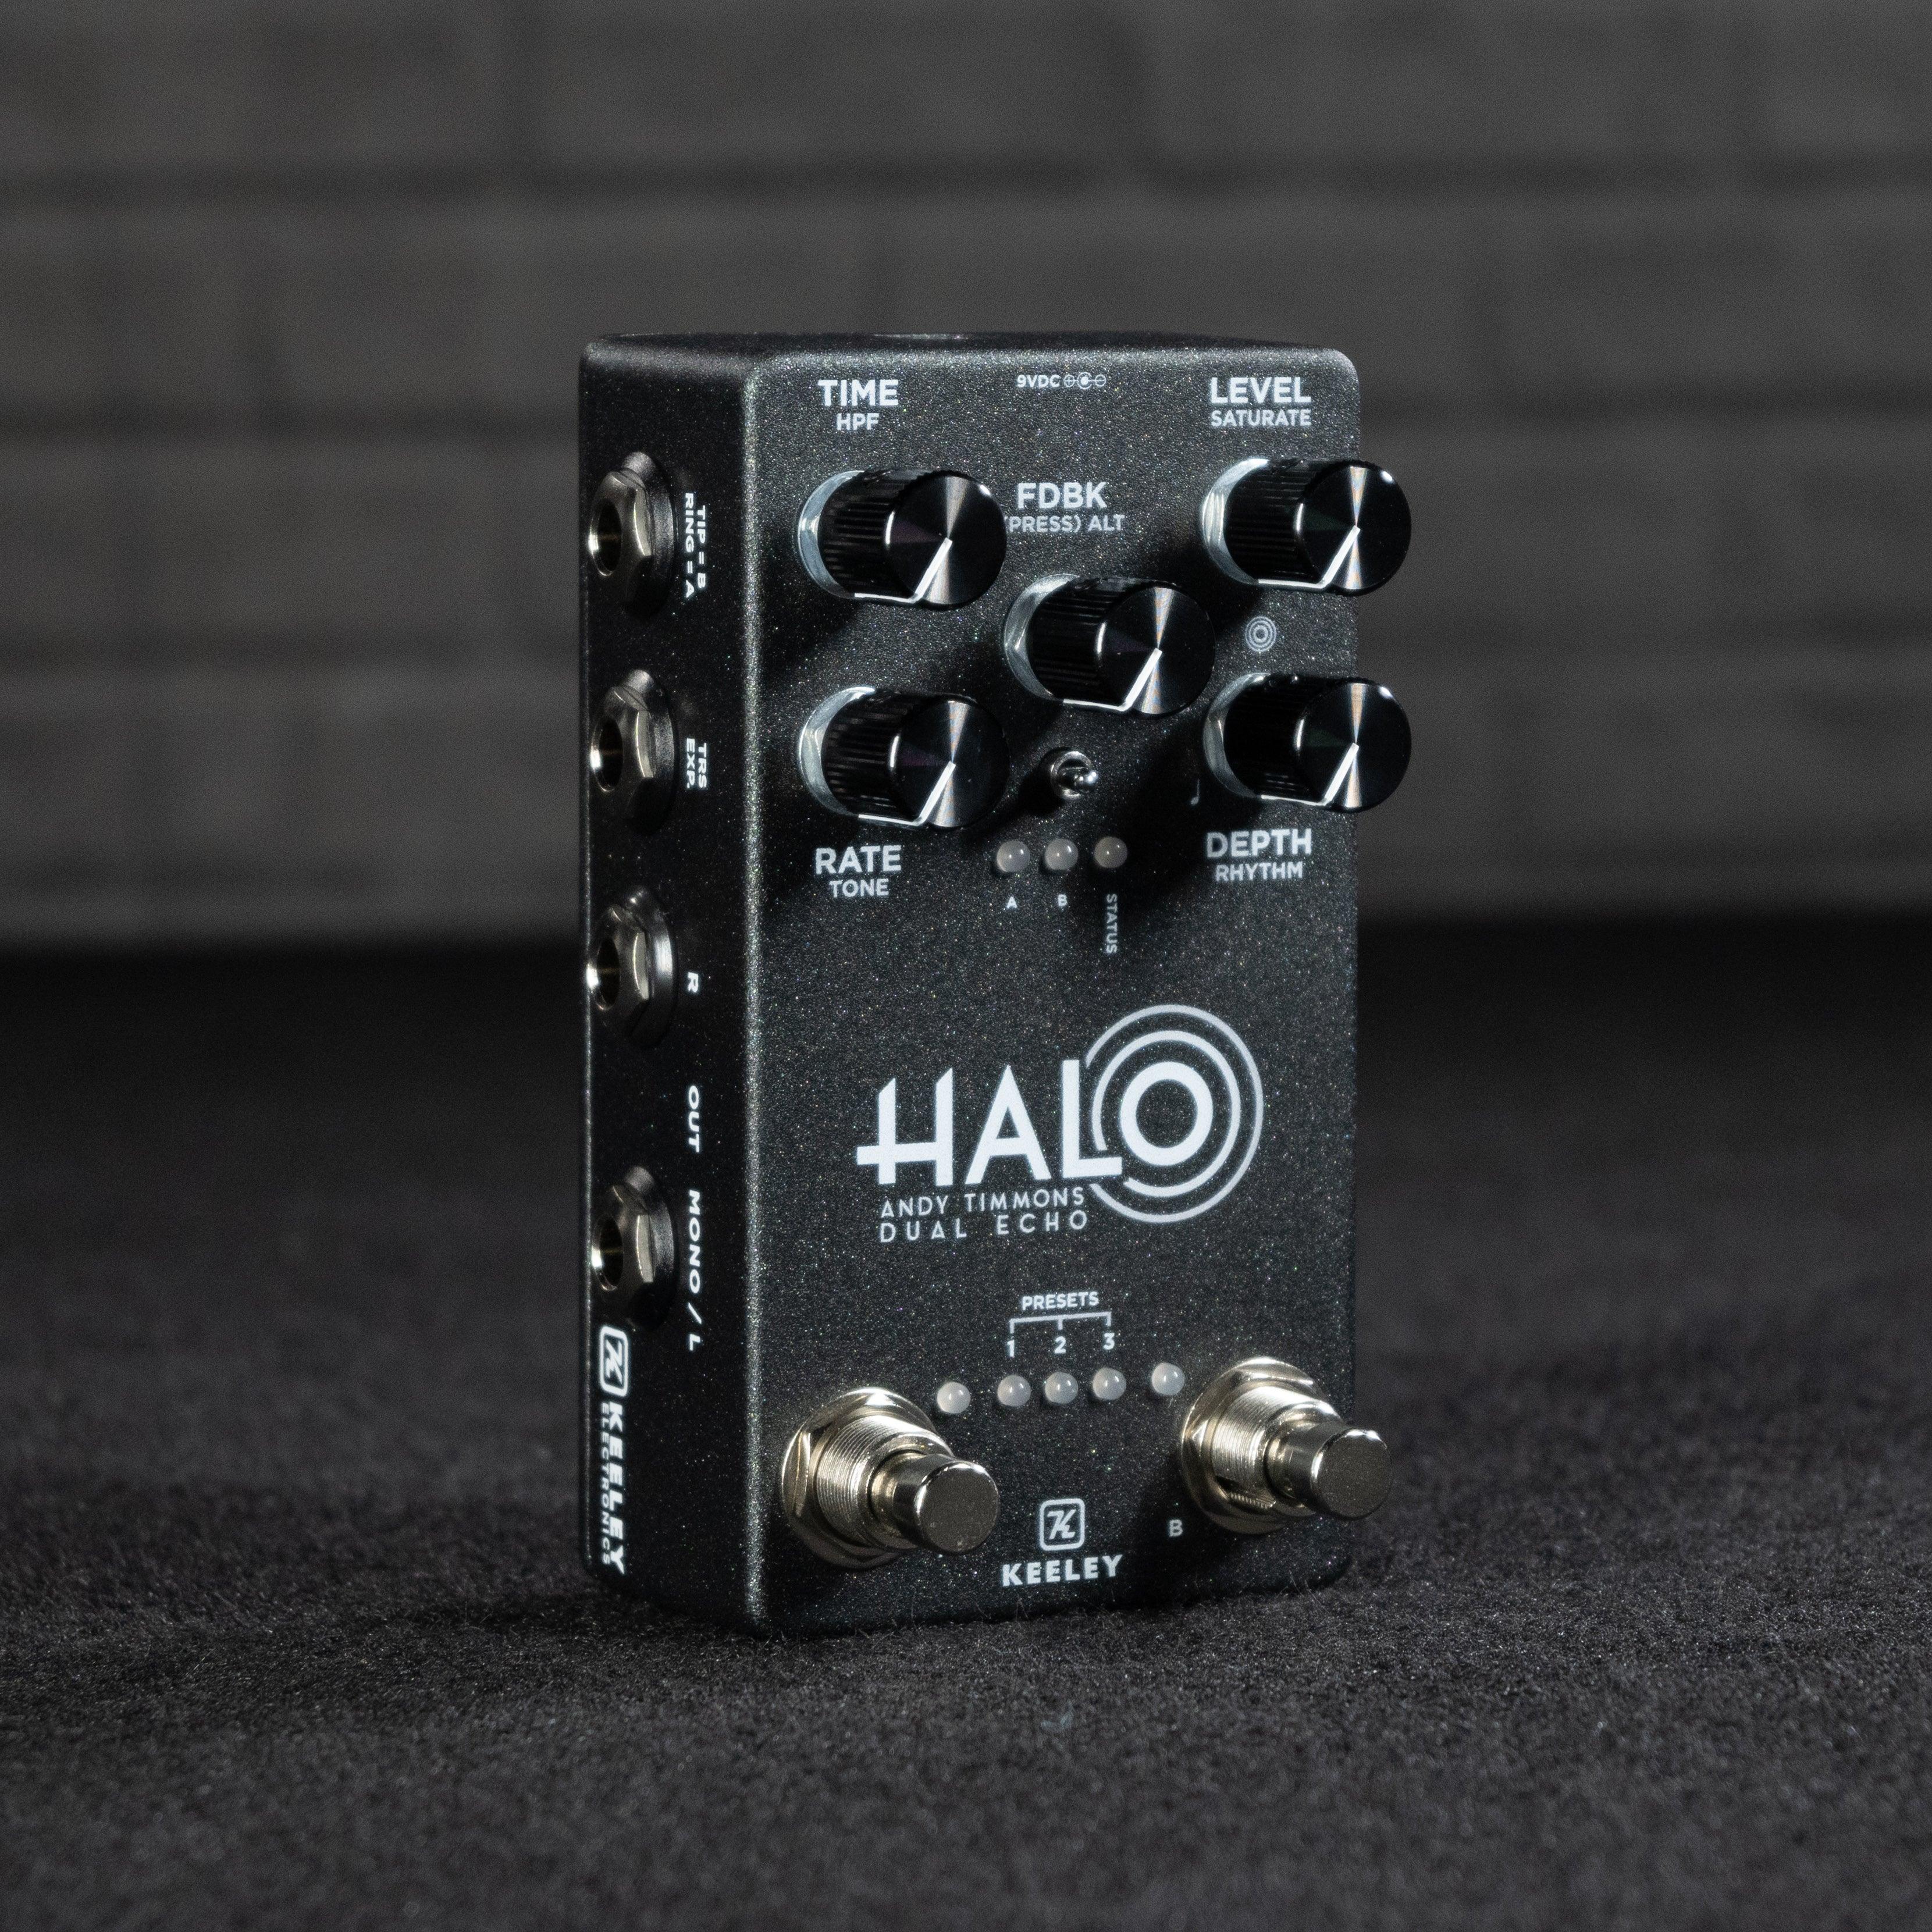 Keeley HALO Andy Timmons Dual Echo Delay - Impulse Music Co.